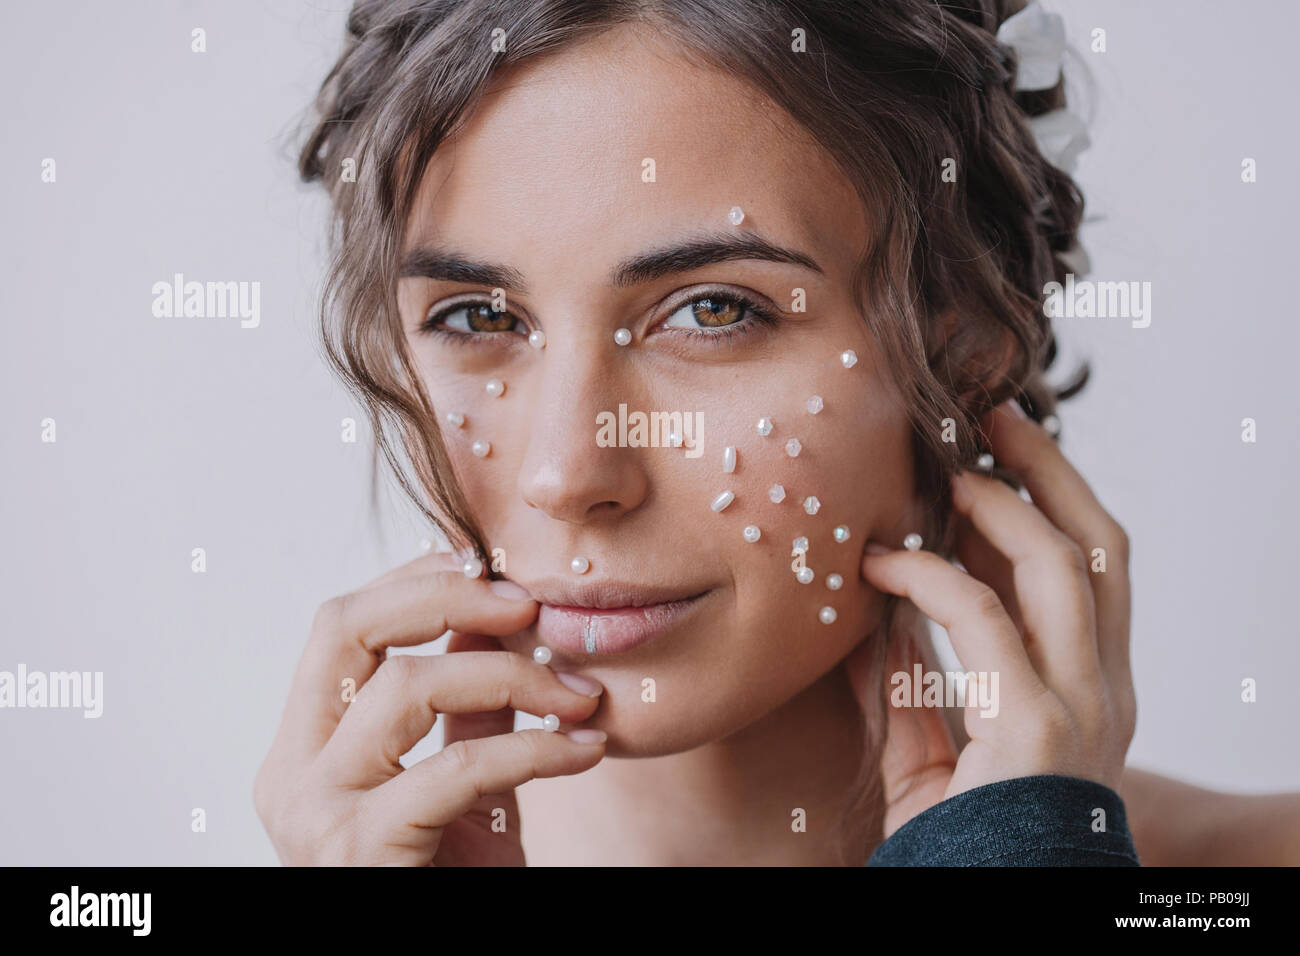 Portrait of a woman with pearls on her face and fingers Stock Photo